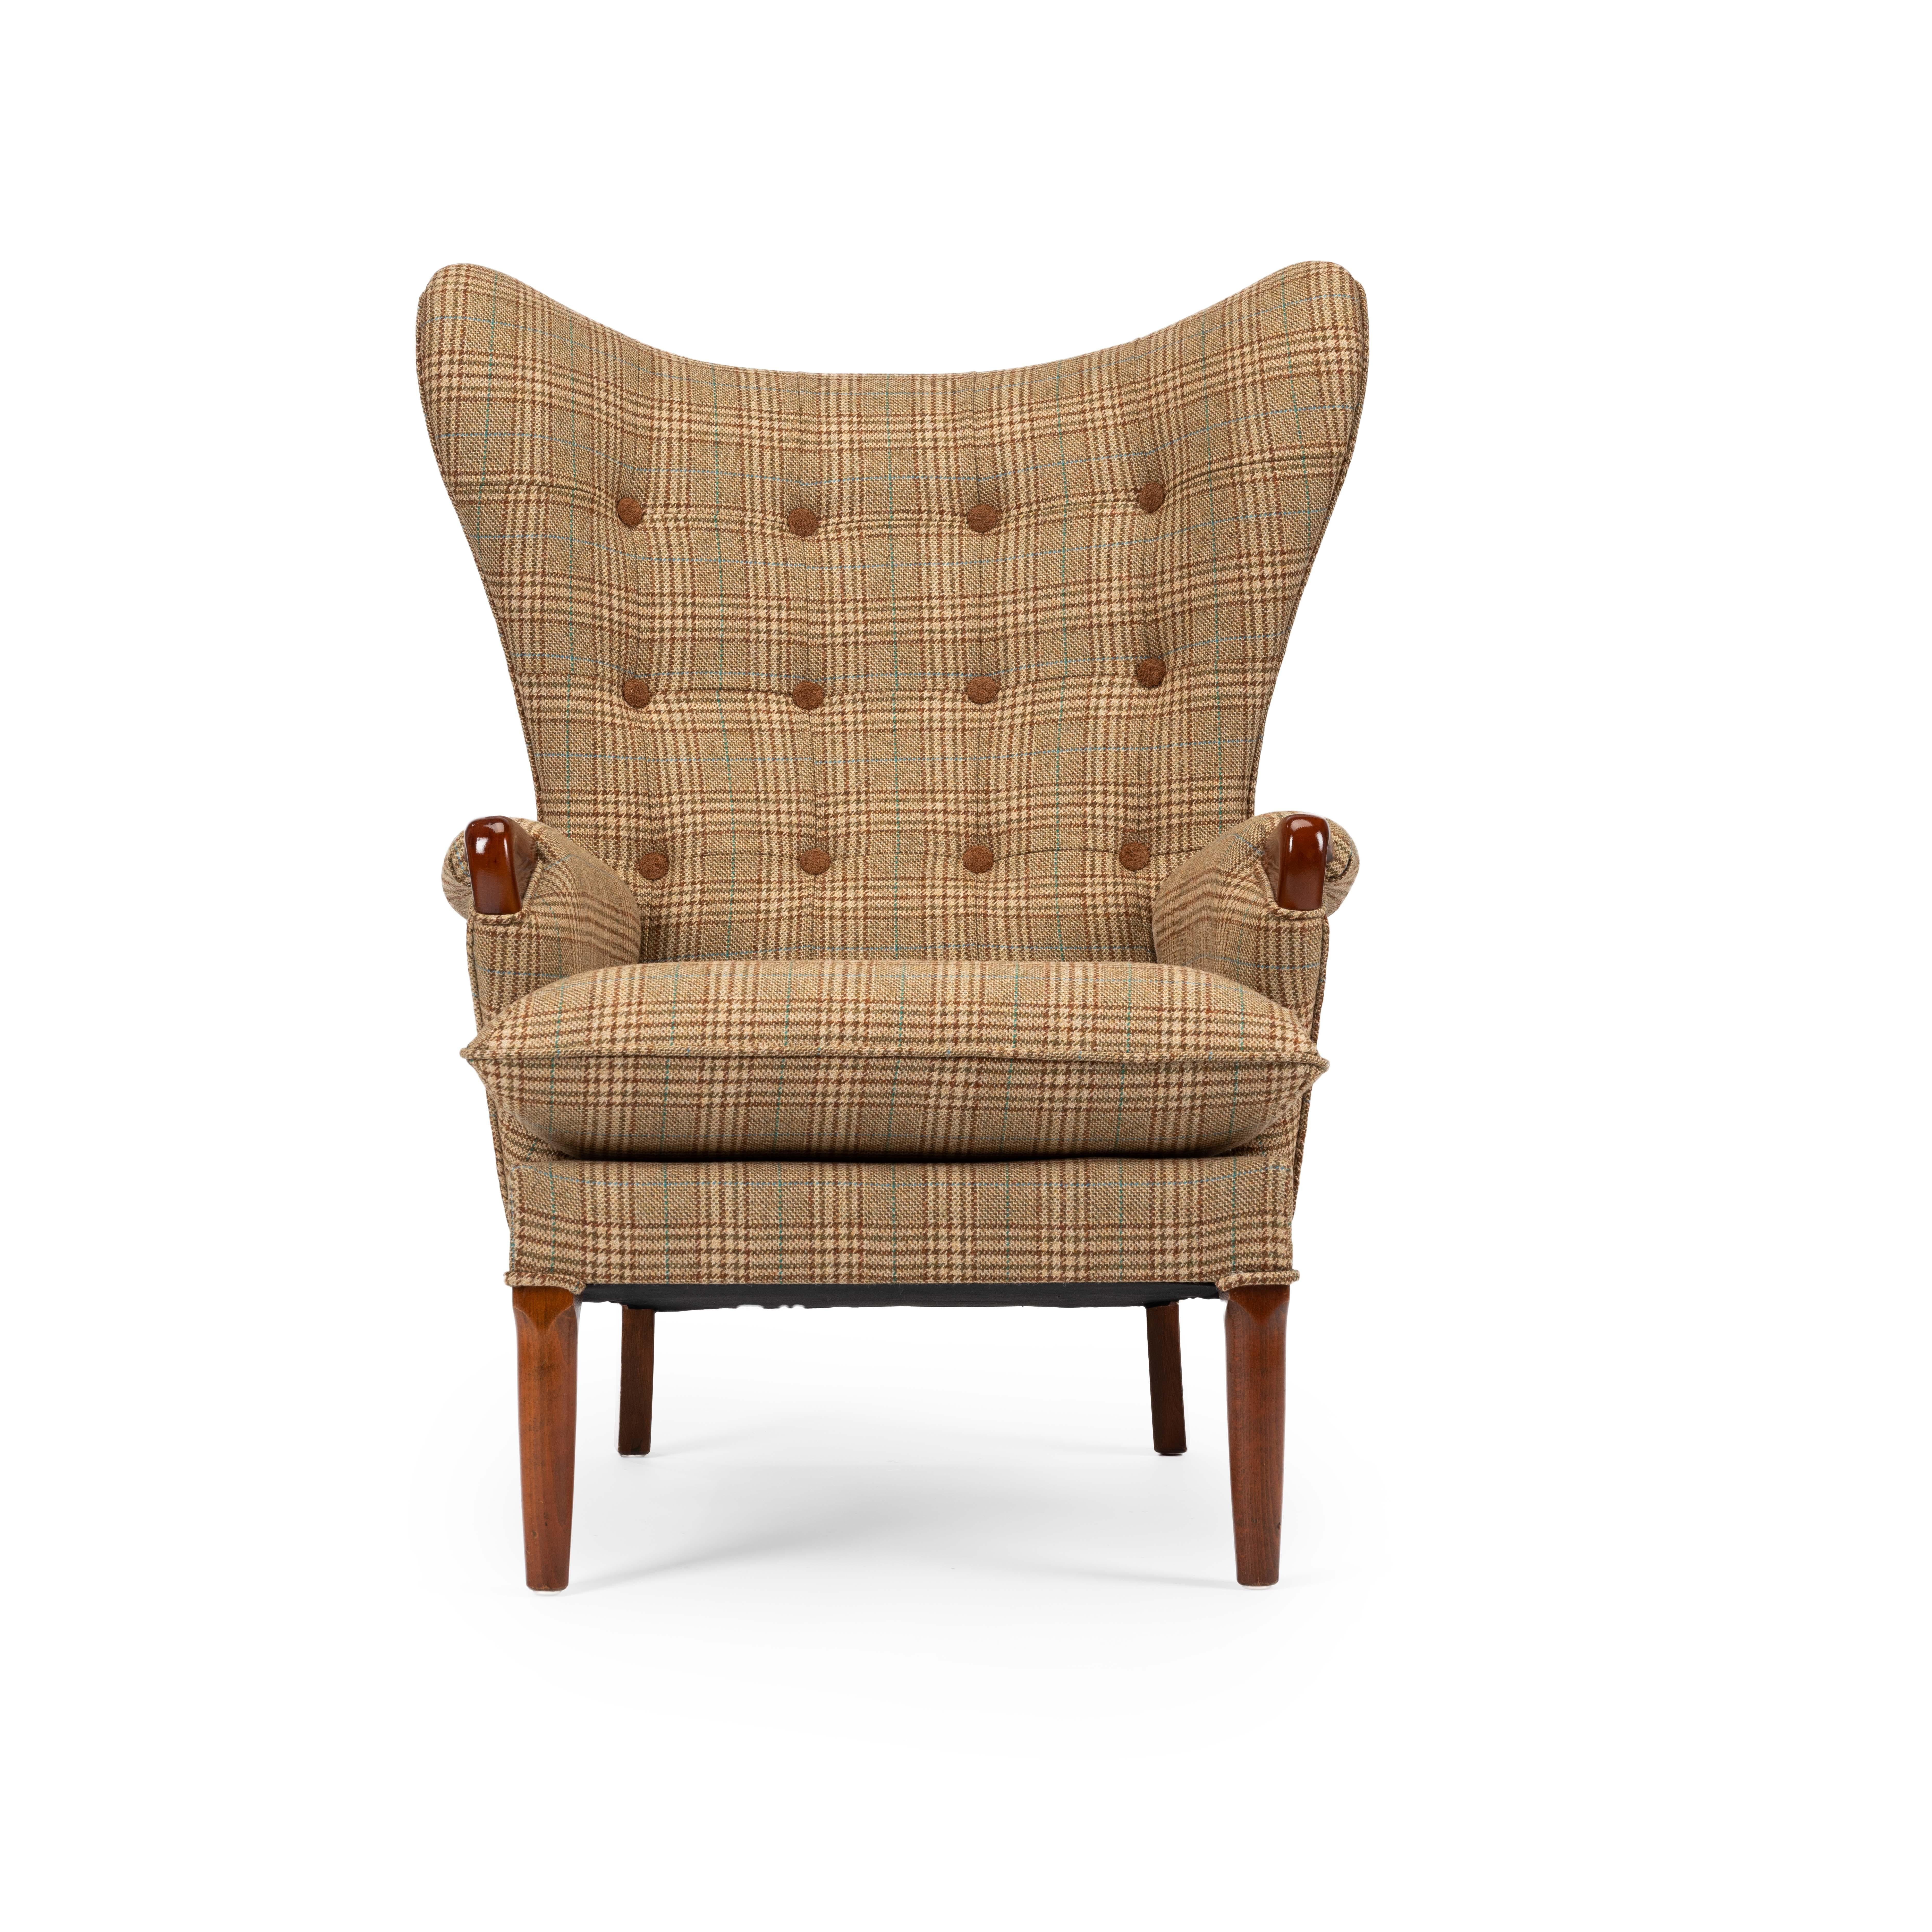 Midcentury vintage wingback chairs reupholstered in Yorkshire tweed, circa 1960s

Stunning matching pair of Mid-Century Modern oversized 'wraparound' vintage 1960s wing chairs reupholstered in a peat and moss colored 100% wool Yorkshire tweed with